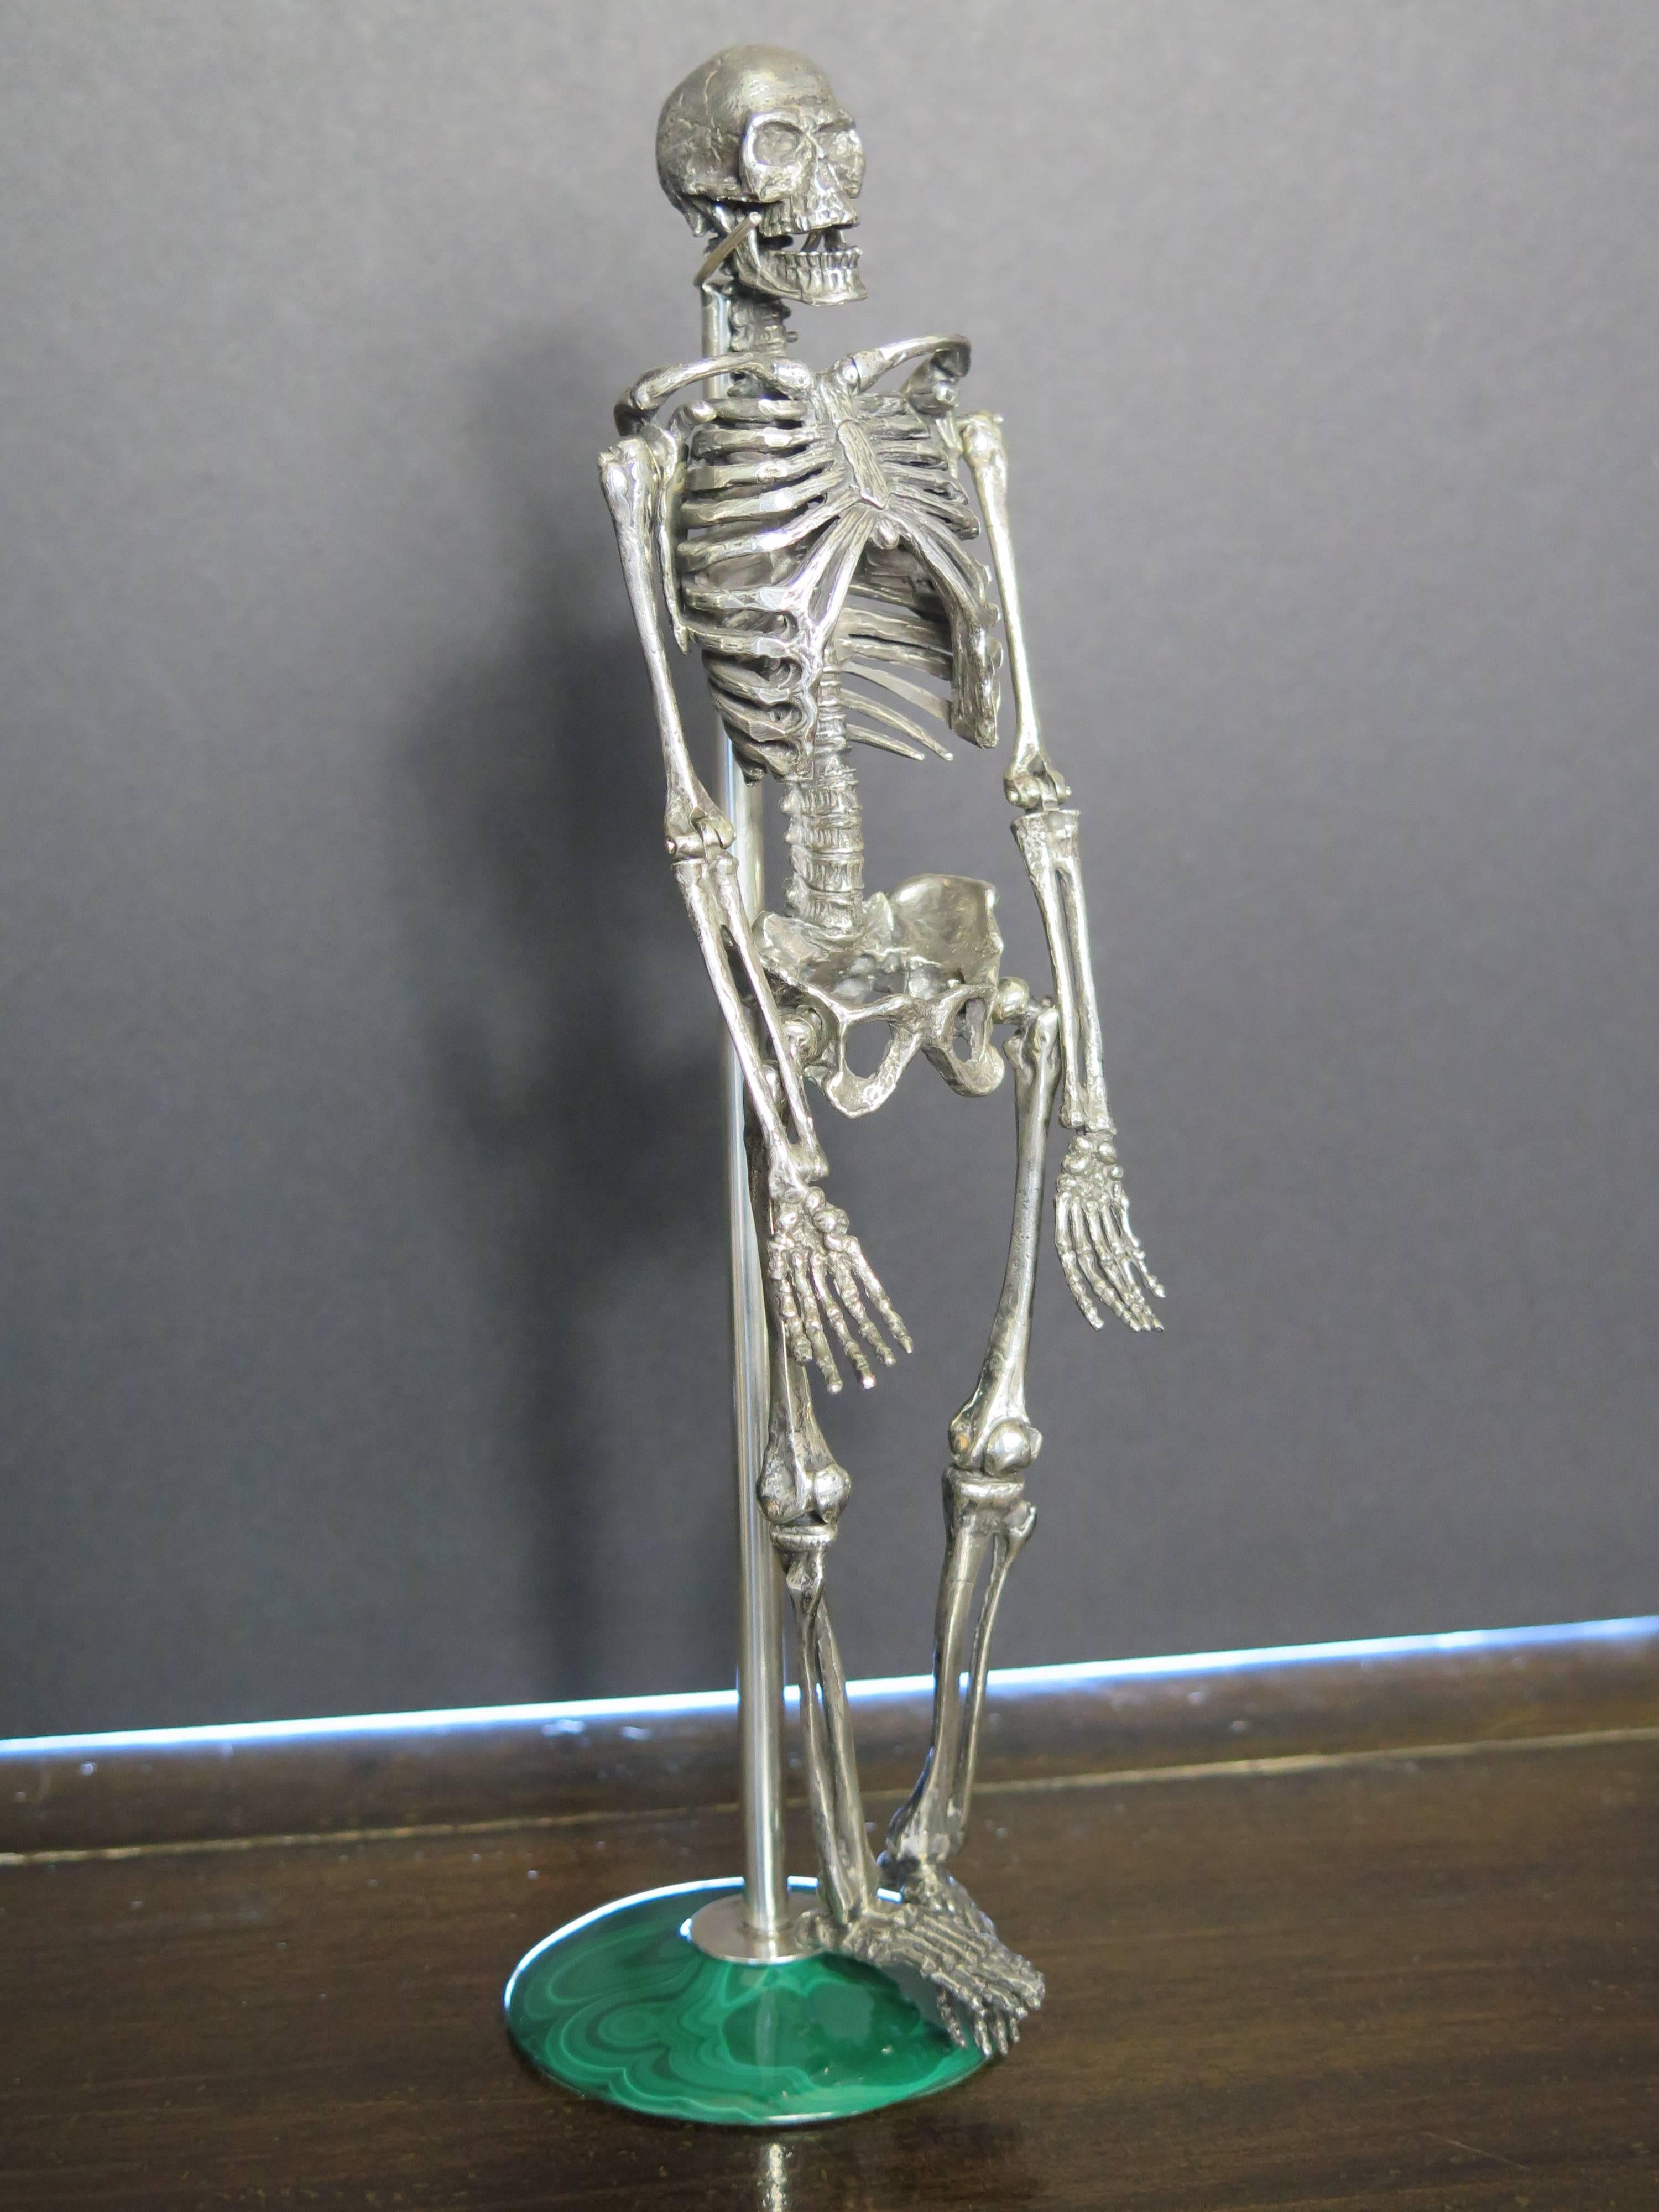 A whimsical anatomically correct silver model of a human skeleton. Its jaw, arms and legs can be placed in several positions. Italian silver. Marked. 
It comes with a malachite base metal stand. 9.5:" tall with stand. 9" without stand.